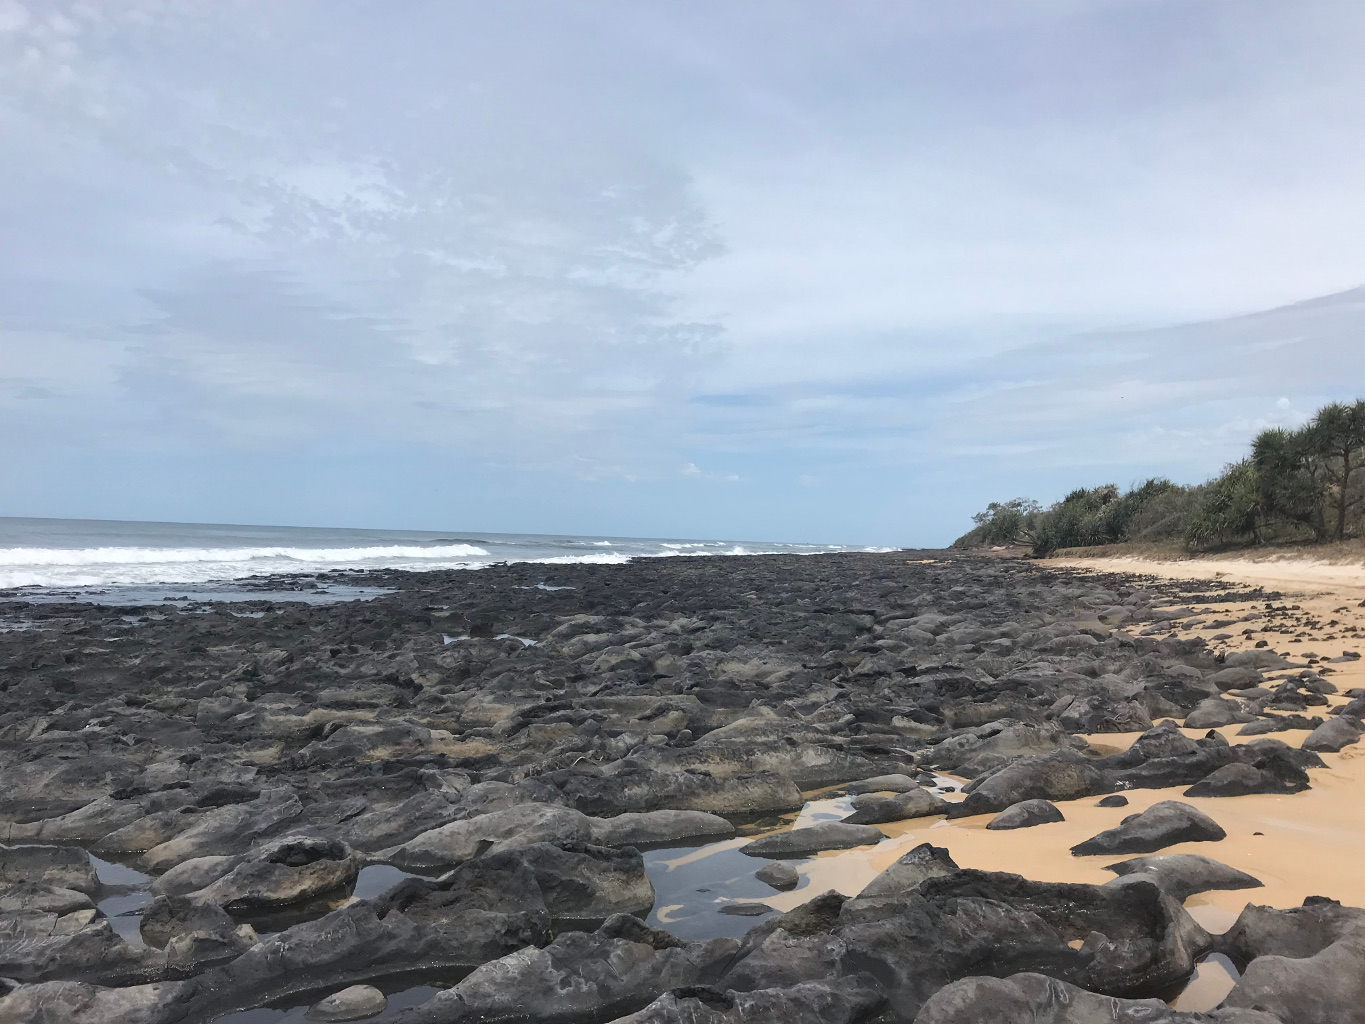 Exposed coffee rock on the eastern beach of K'gari. Photo by Linda Behrendorff, Queensland Government